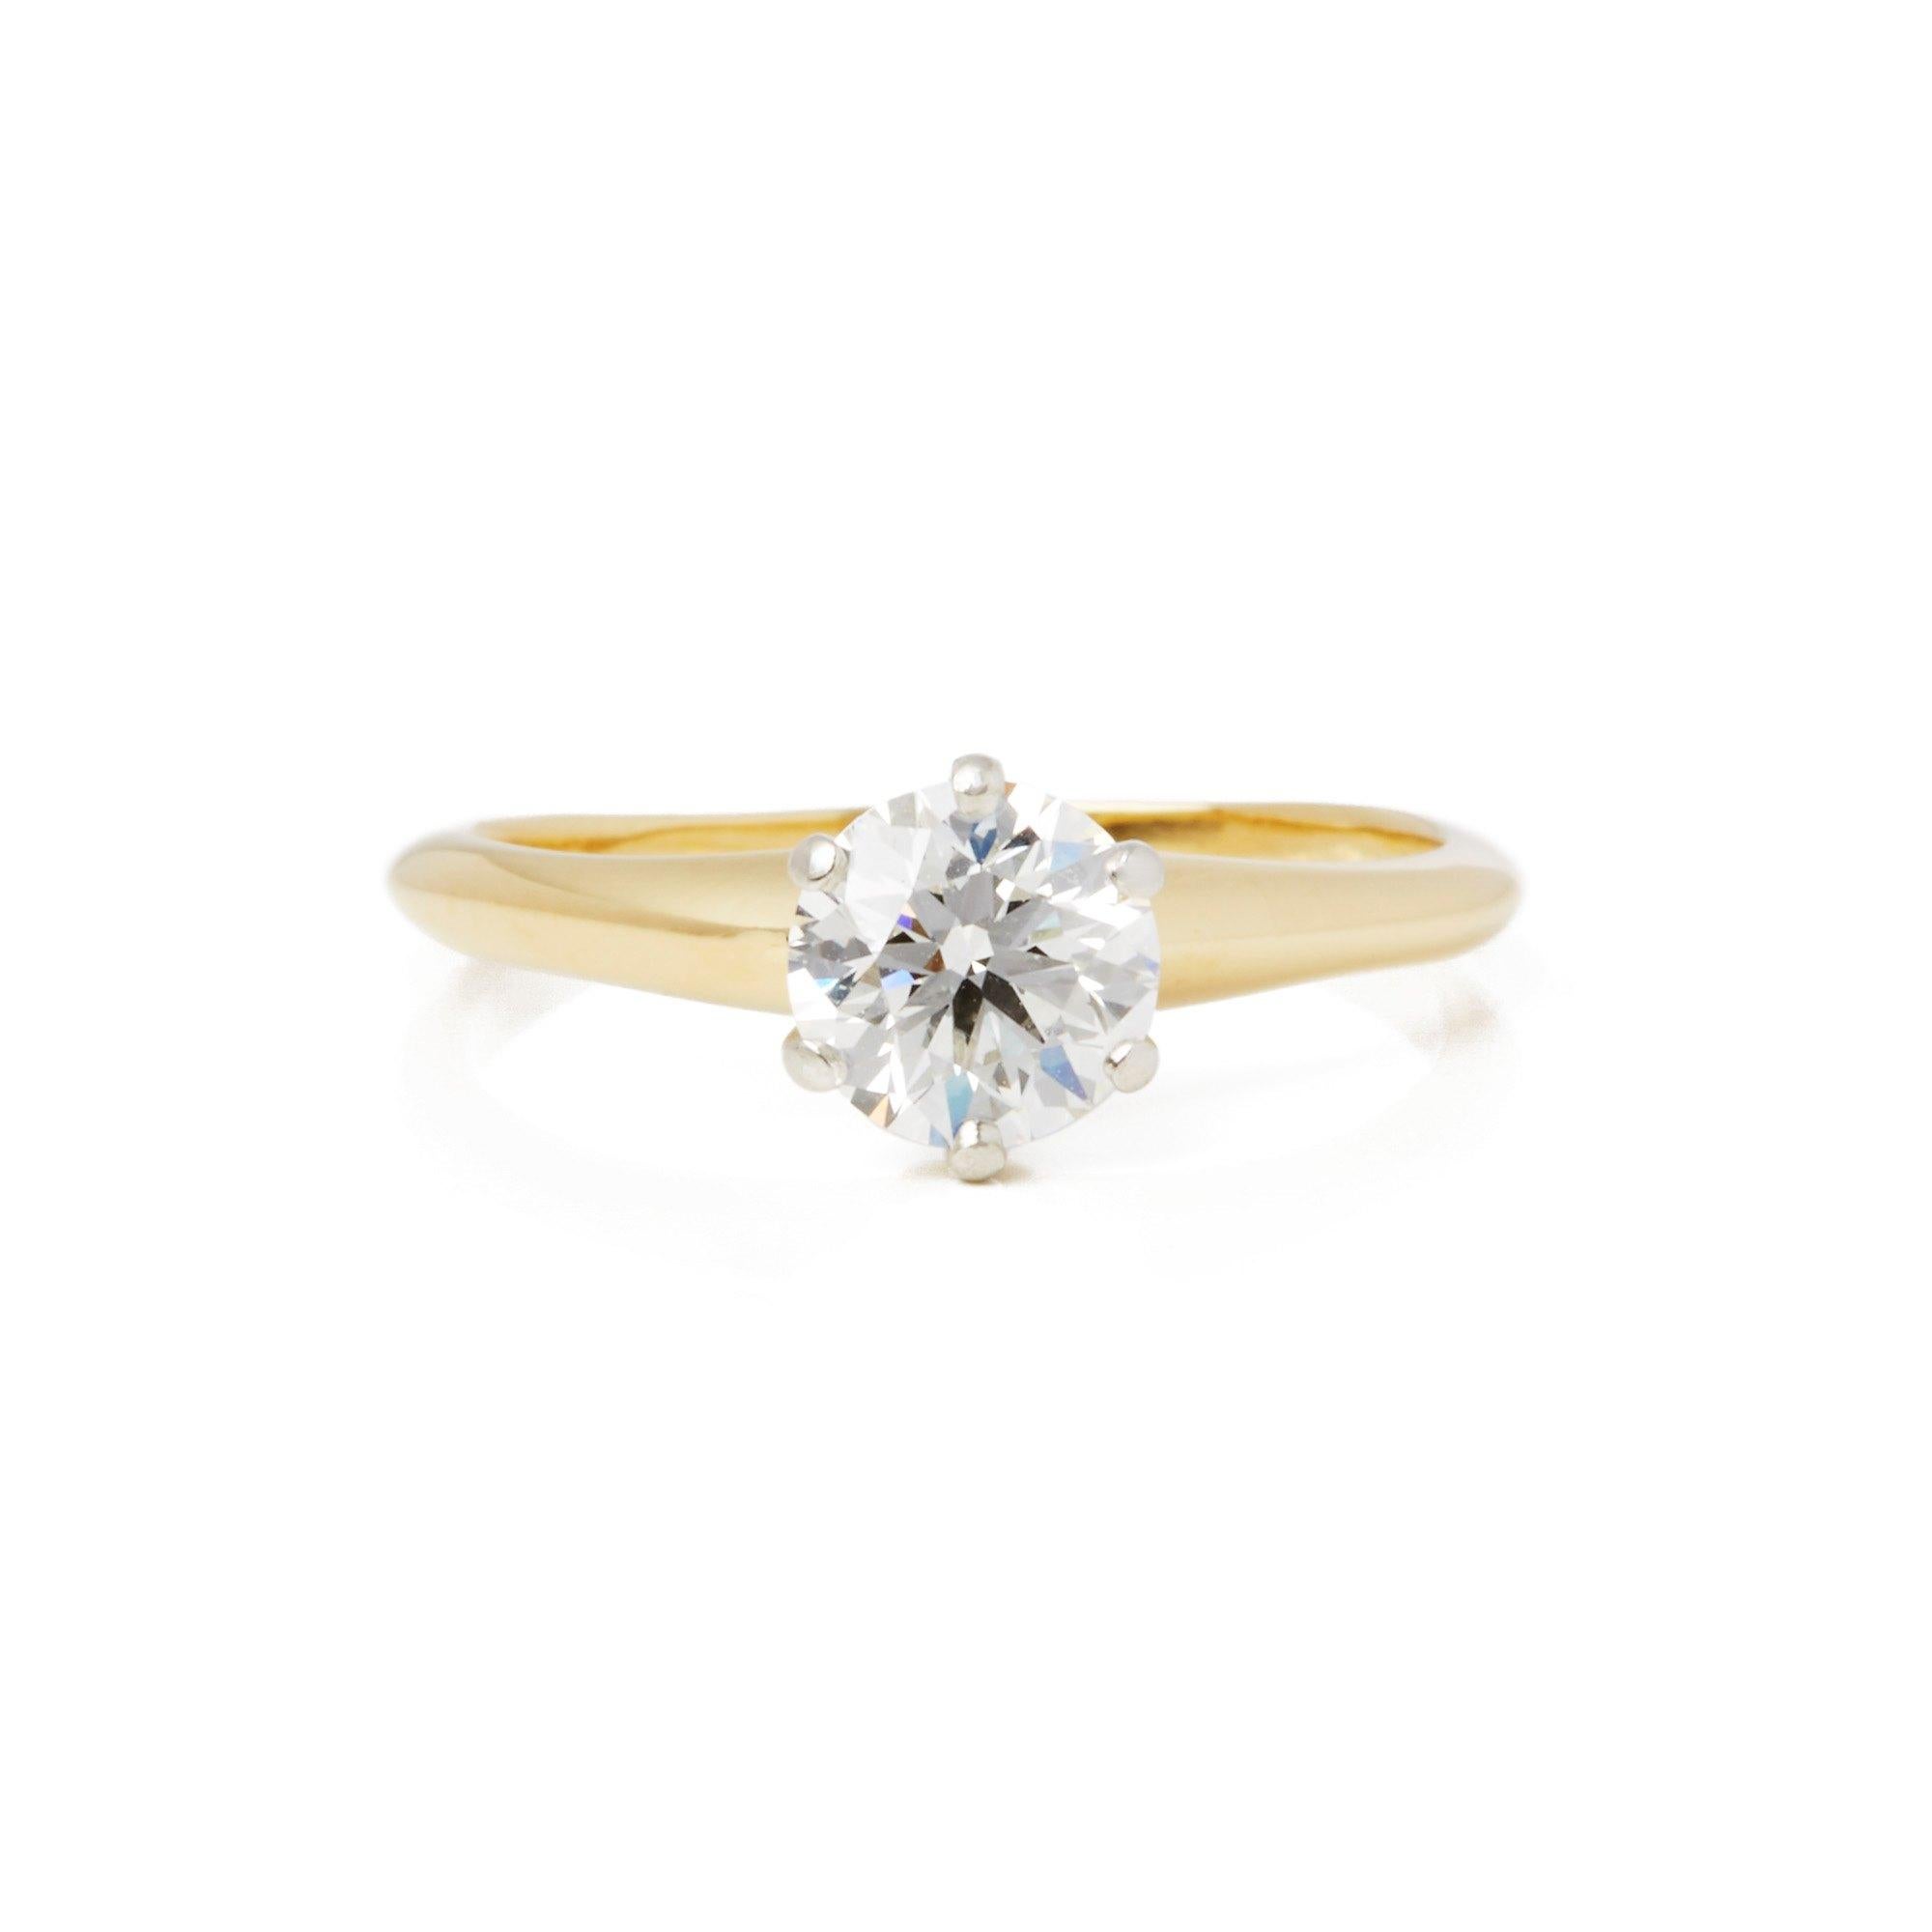 This Ring by Tiffany & Co features a Single Round Brilliant Cut Diamond G Colour, VS2 Clarity in a claw setting totalling 0.85cts. Mounted in 18k Yellow Gold. Finger Size UK L, EU Size 52, USA Size 6. This Ring can be re-sized. Complete with